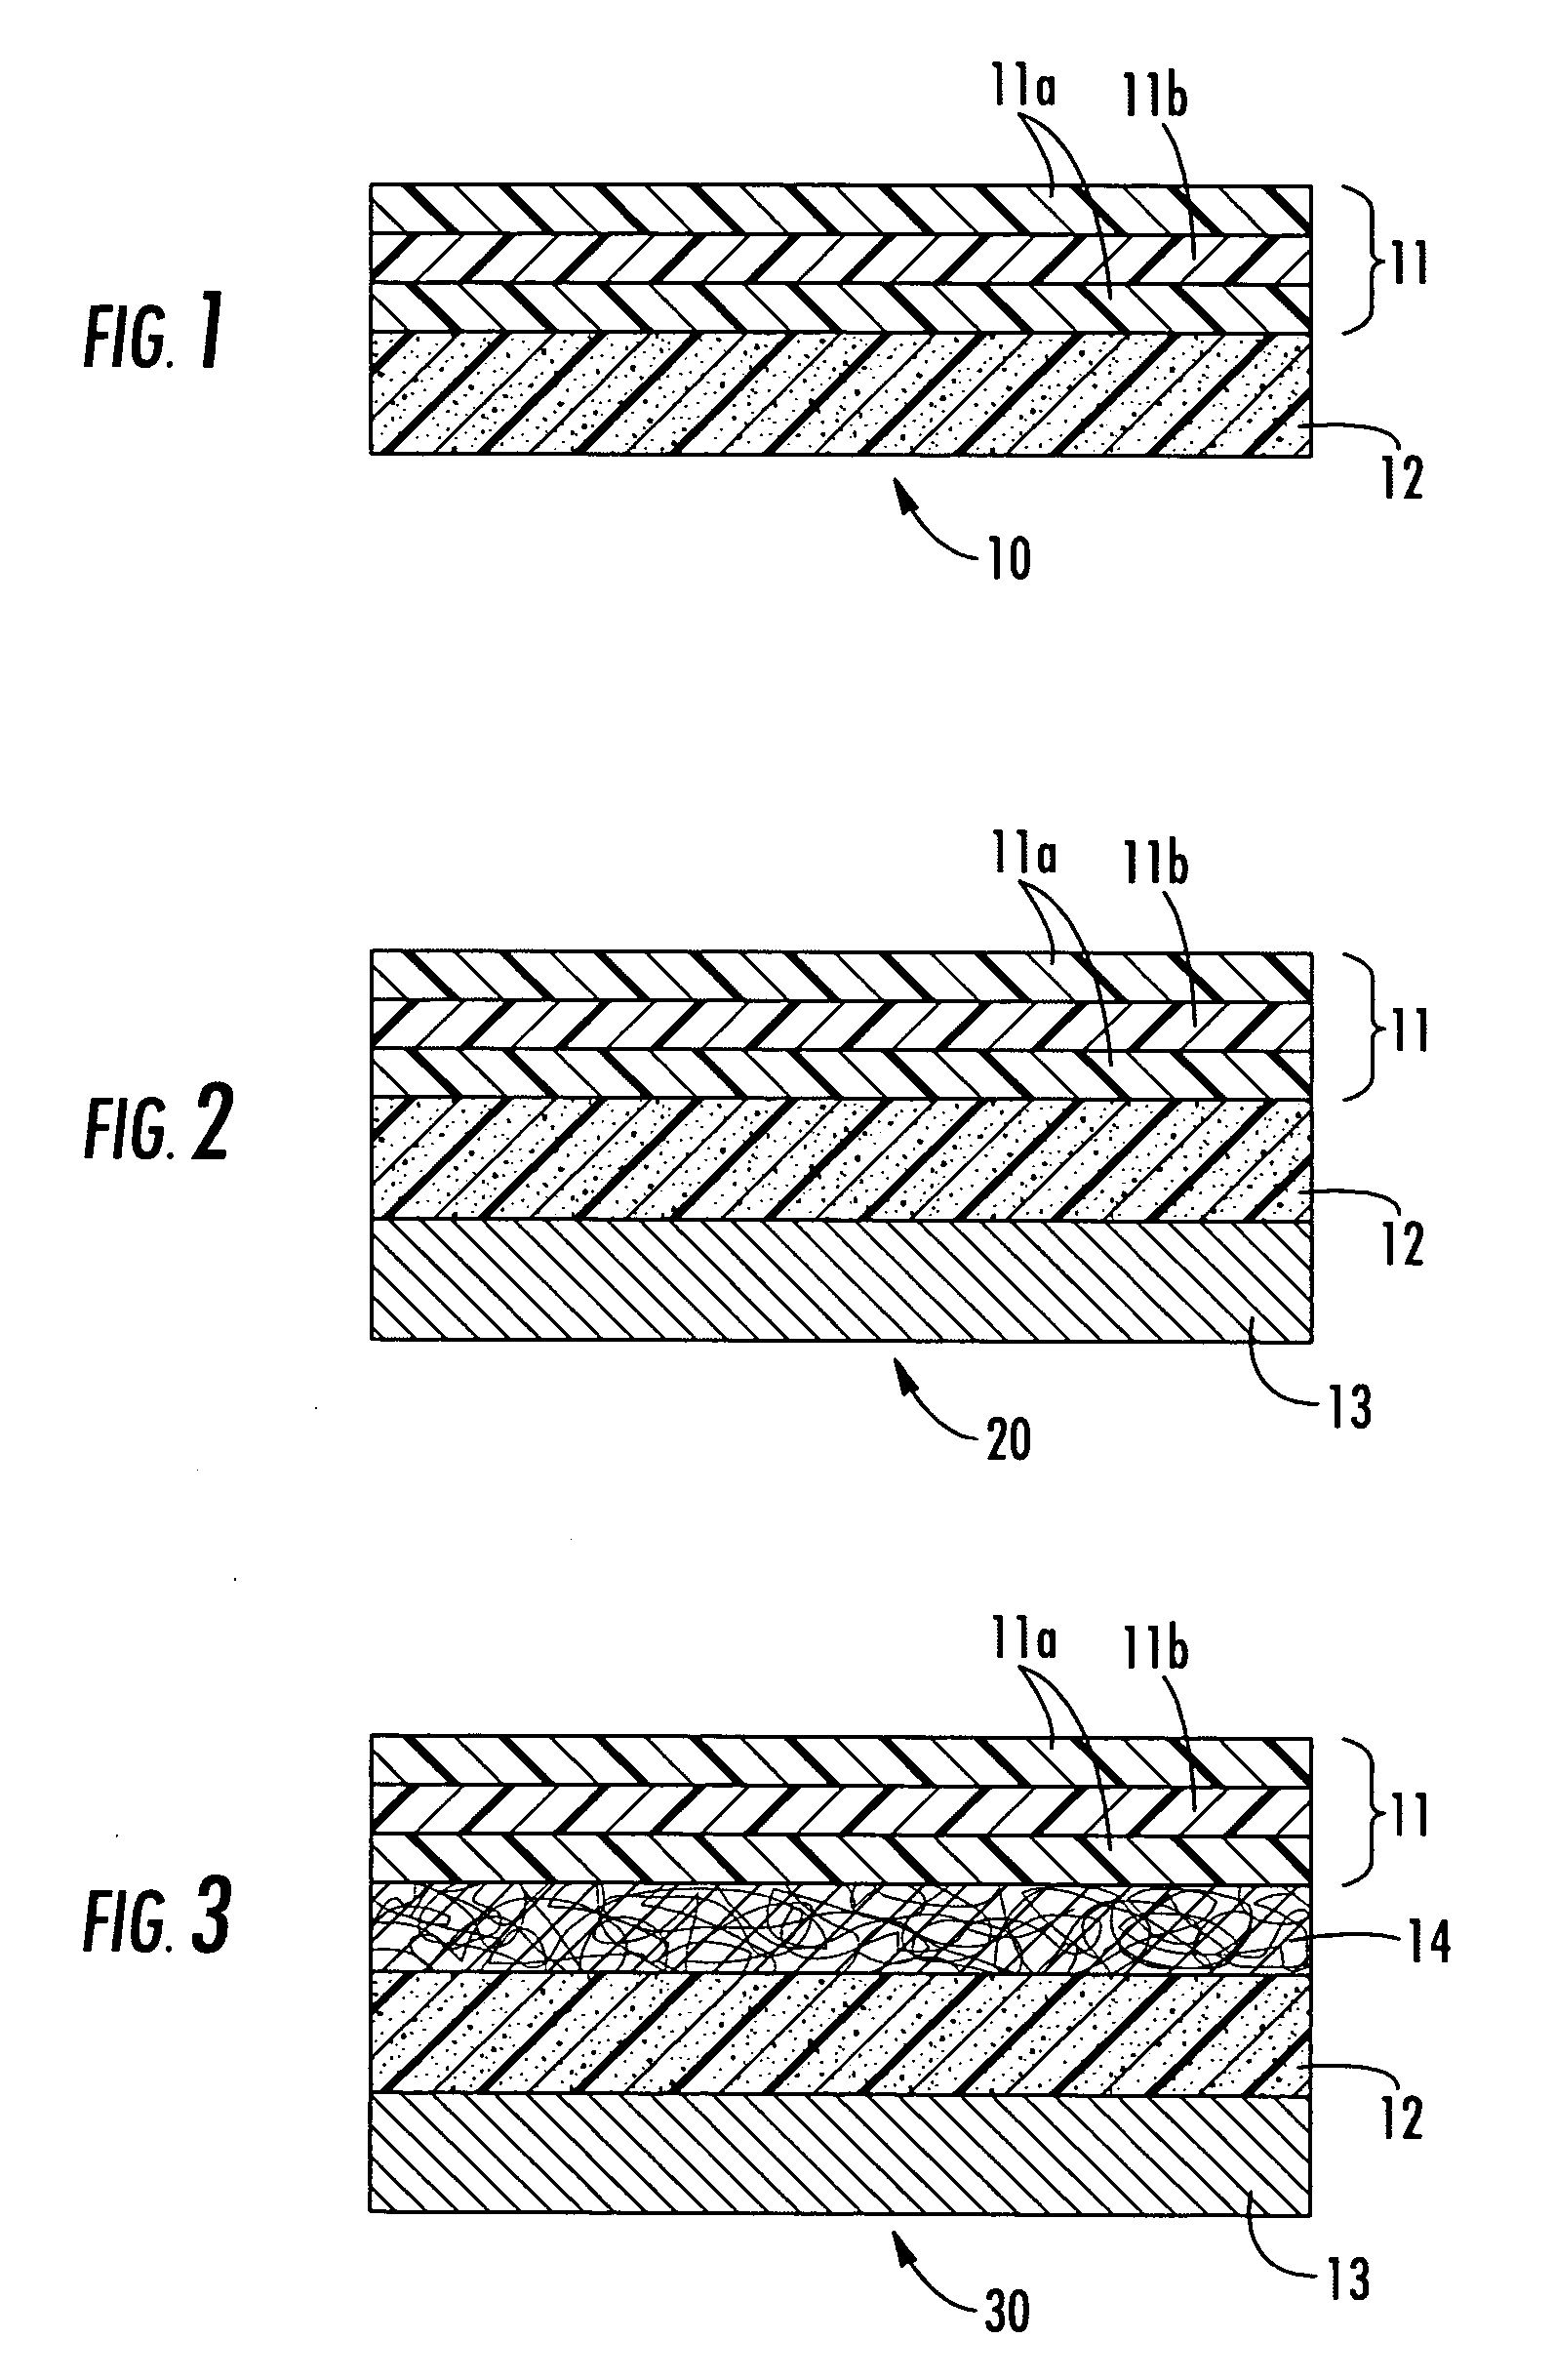 Chemically resistant radiation attenuation barrier